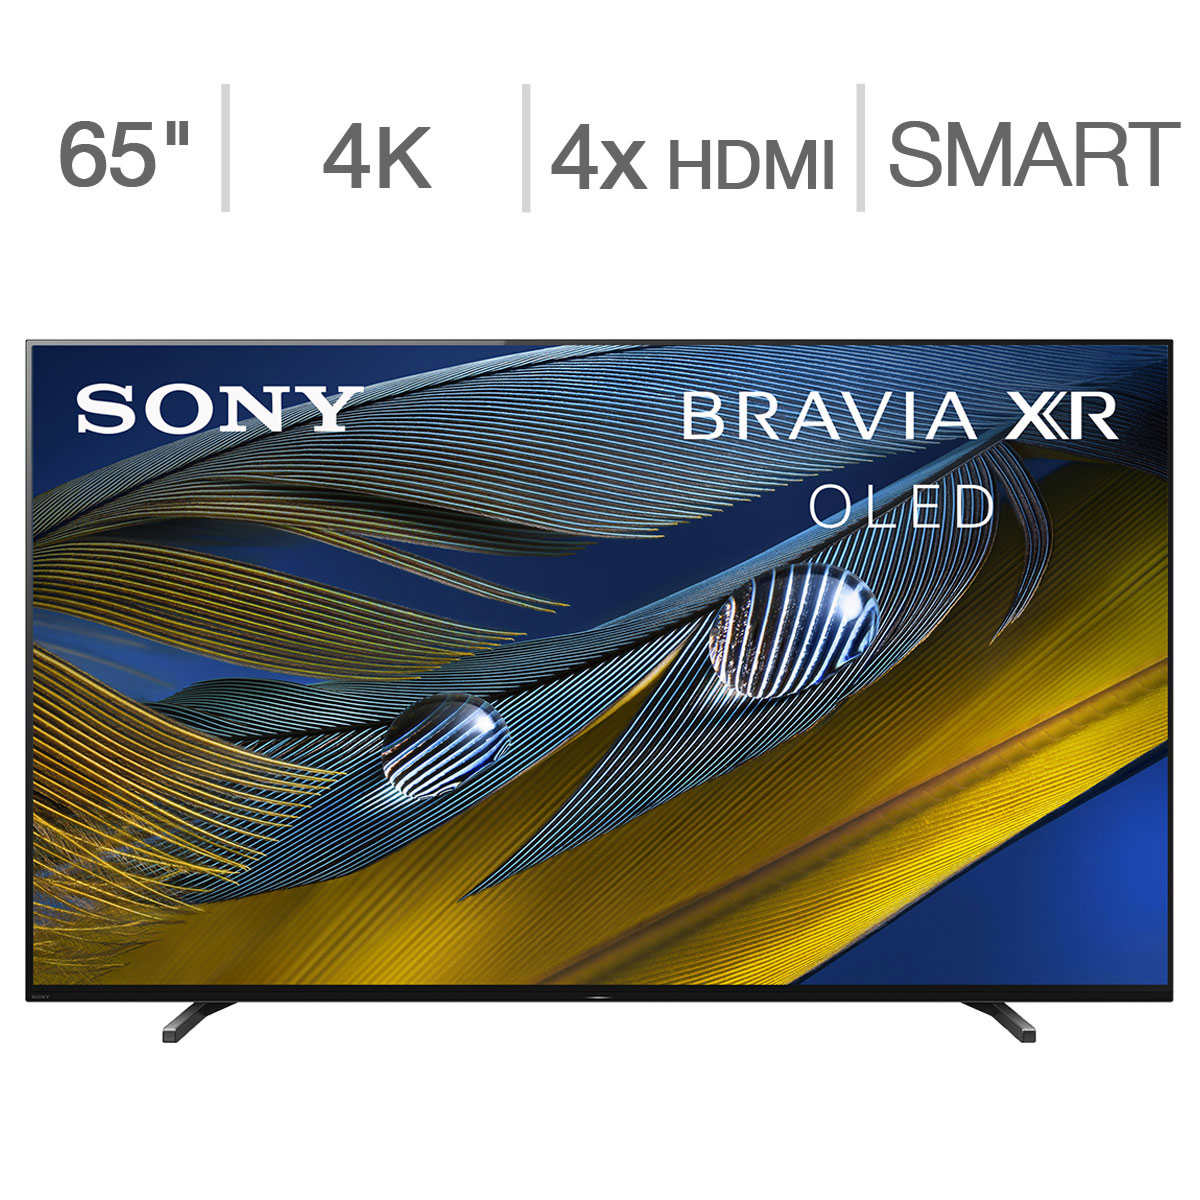 YMMV Costco Sony 65" Class - A80CJ Series - 4K UHD OLED TV - Allstate 3-Year Protection Plan Bundle Included for 5 years of total coverage* $1000